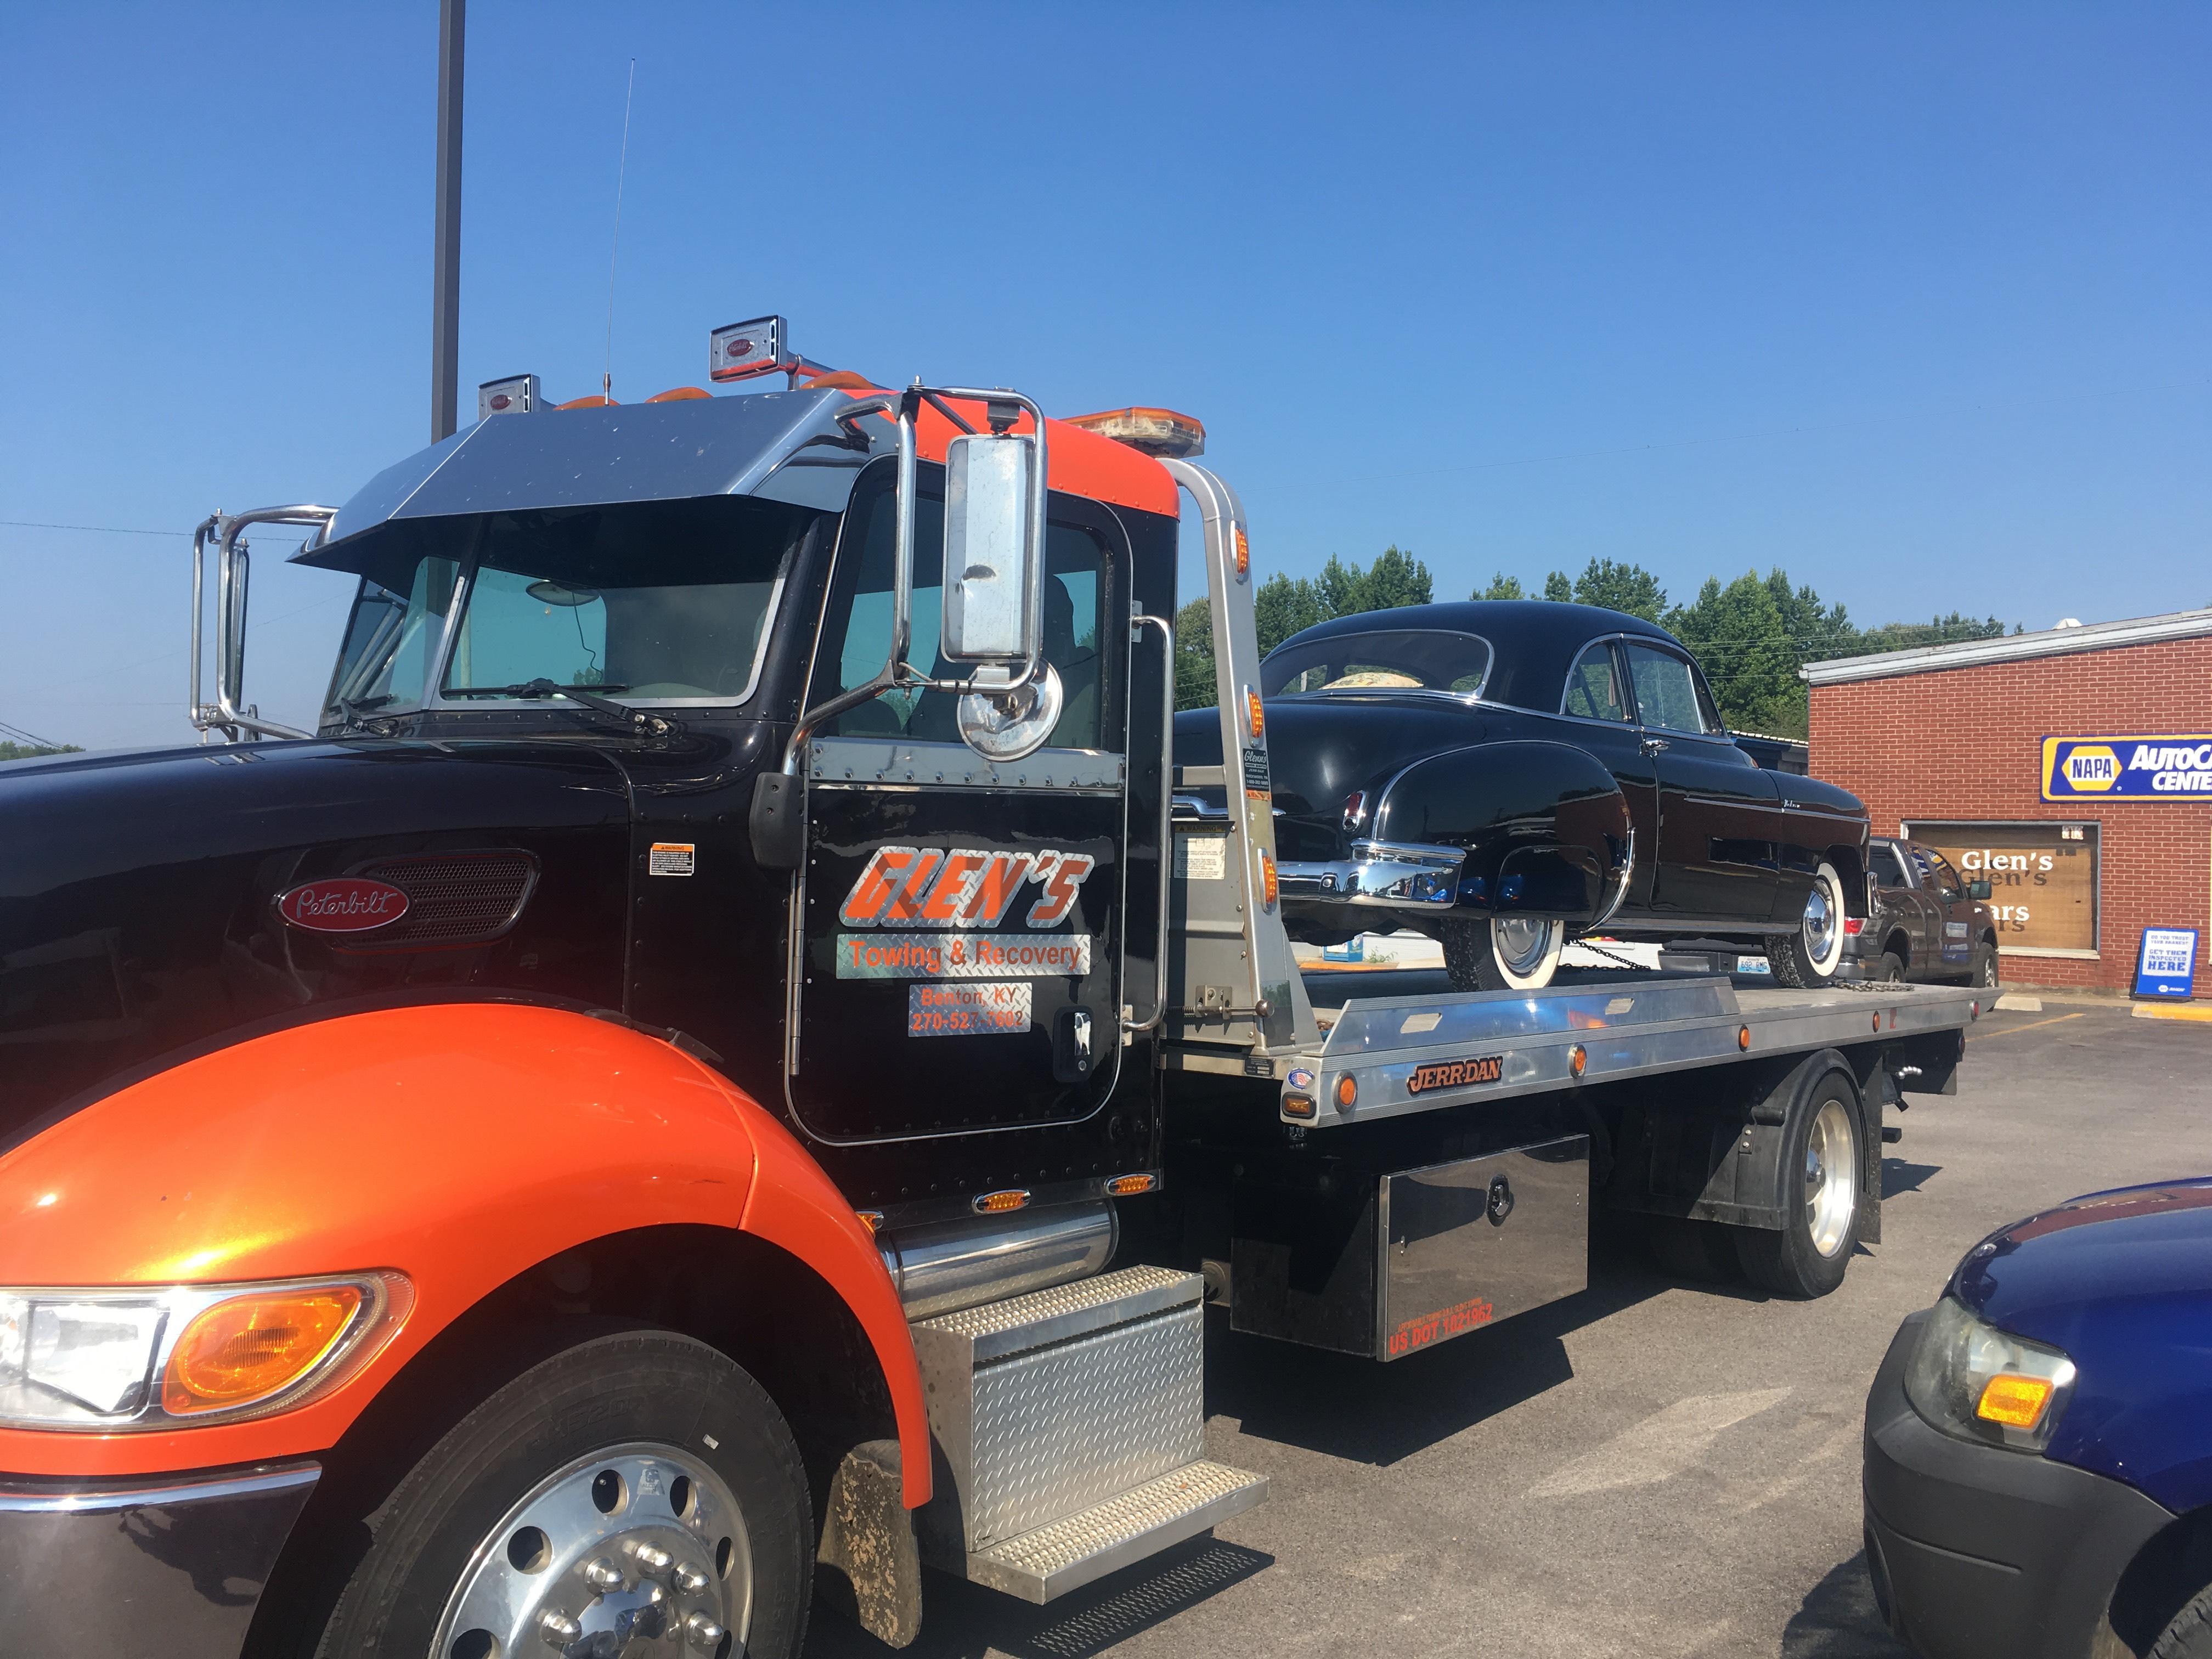 Glen's Automotive & Towing | Benton, KY | (270) 527-7602 | 24 Hour Towing Service | Light Duty Towing | Medium Duty Towing | Heavy Duty Towing | Flatbed Towing | Box Truck Towing | School Bus Towing | Classic Car Towing | Dually Towing | Exotic Towing | Junk Car Removal | Limousine Towing | Winching & Extraction | Wrecker Towing | Luxury Car Towing | Accident Recovery | Equipment Transportation | Moving Forklifts | Scissor Lifts Movers | Boom Lifts Movers | Excavators Movers | Compressors Movers | Loadshifts | Sport Car Towing | Long Distance Towing | Auto Transport | Tire Service | Tipsy Towing | Lockouts | Fuel Delivery | Jump Starts | Private Property Impound (Non-Consensual Towing) | Roadside Assistance | Motorcycle Towing